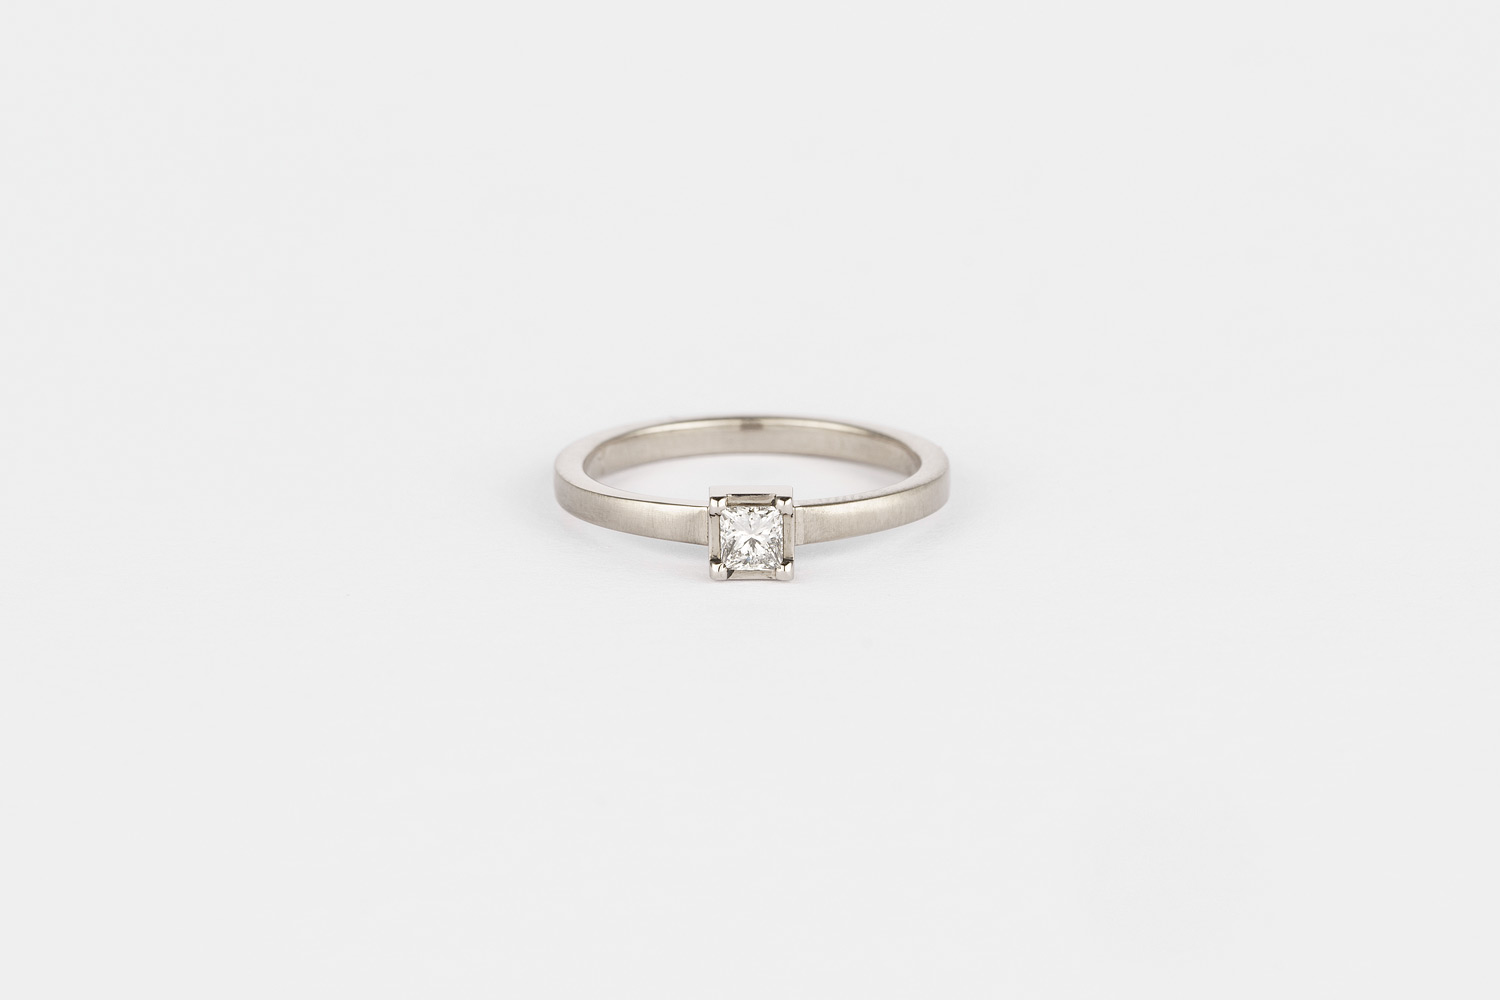  Fairtrade 18ct white gold set with a conflict-free princess-cut diamond 